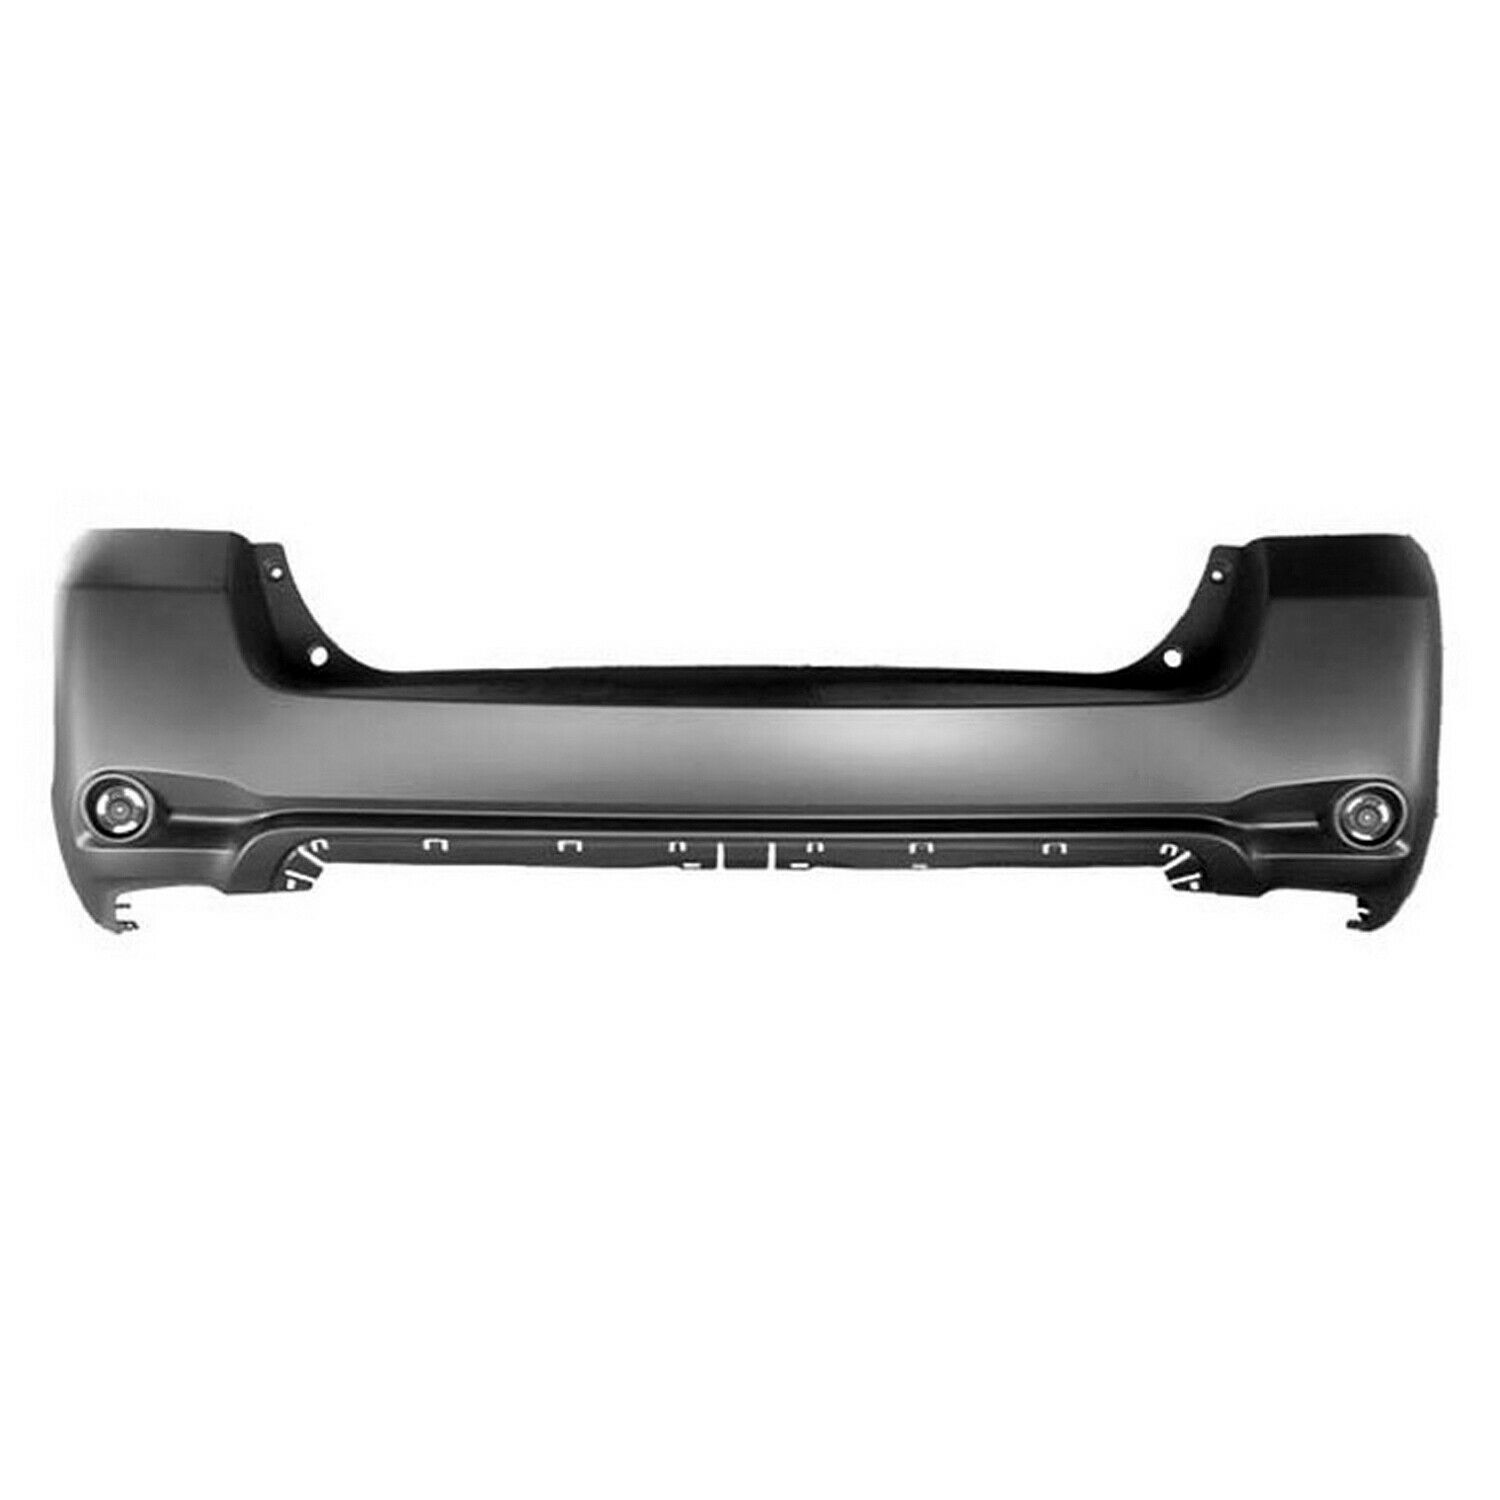 2008-2010 Toyota Highlander Rear Bumper Painted to Match